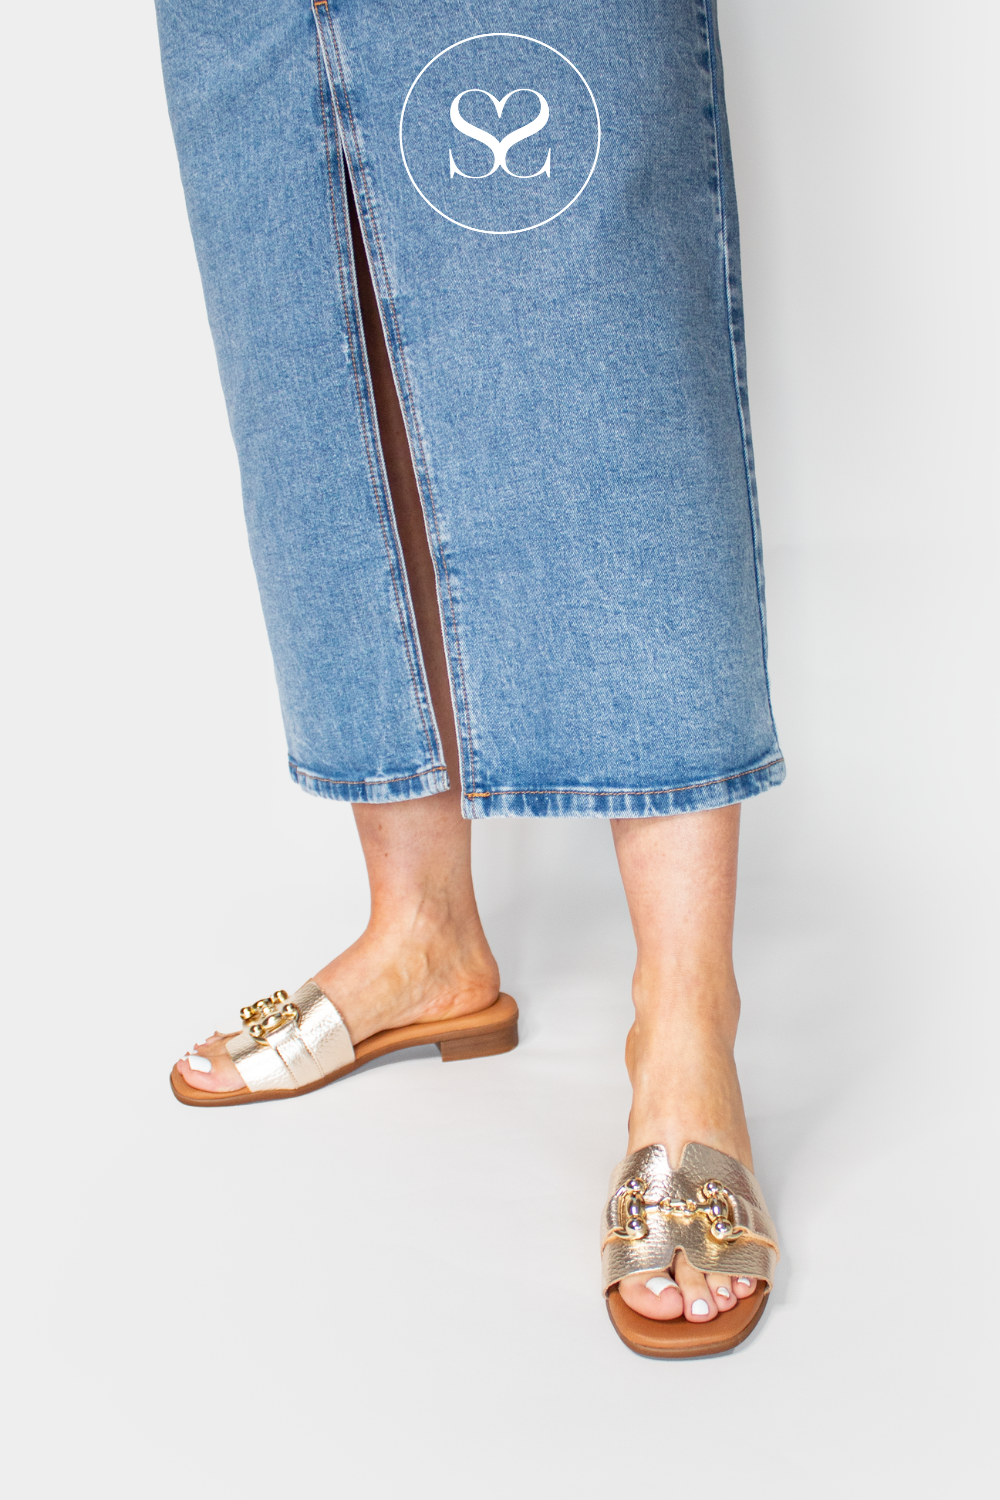 OH MY SANDALS BRONZE LOW HEEL FLAT SANDALS, METALLIC WITH GOLD CHAIN DETAIL